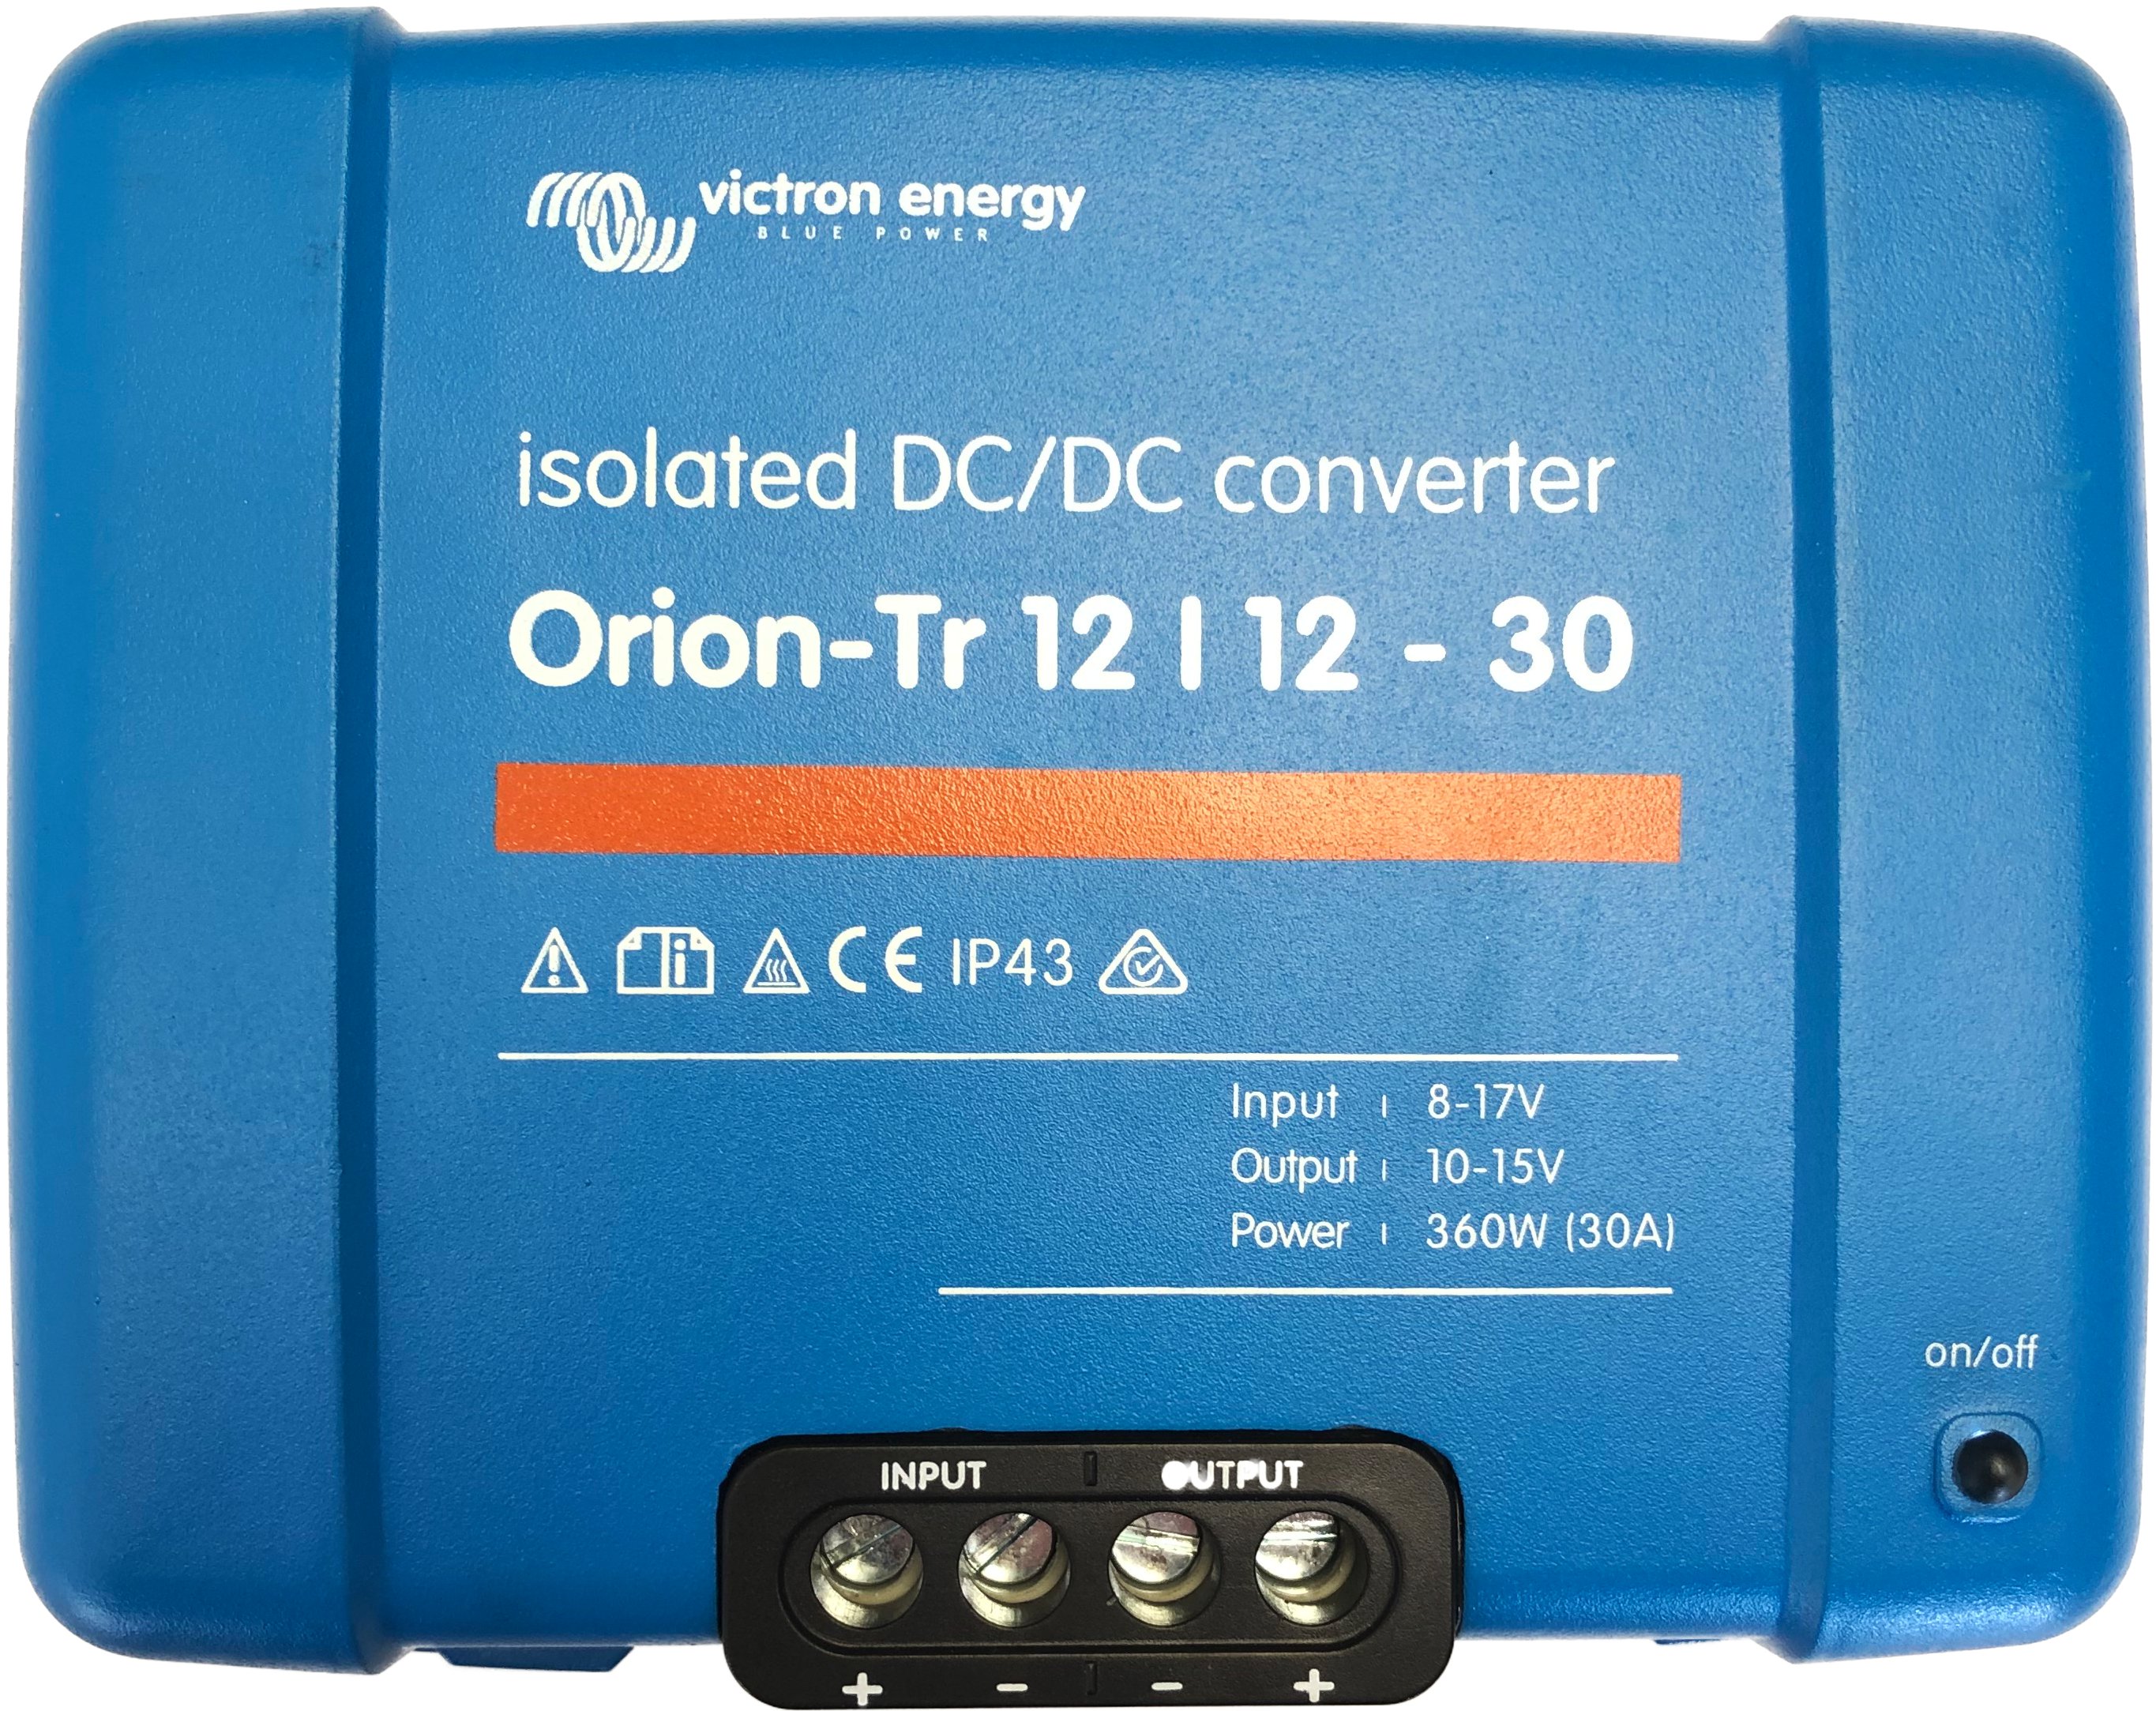 Does the Victron Energy Orion-Tr 12/12-30A non isolated dc dc converter have a power usage chart?